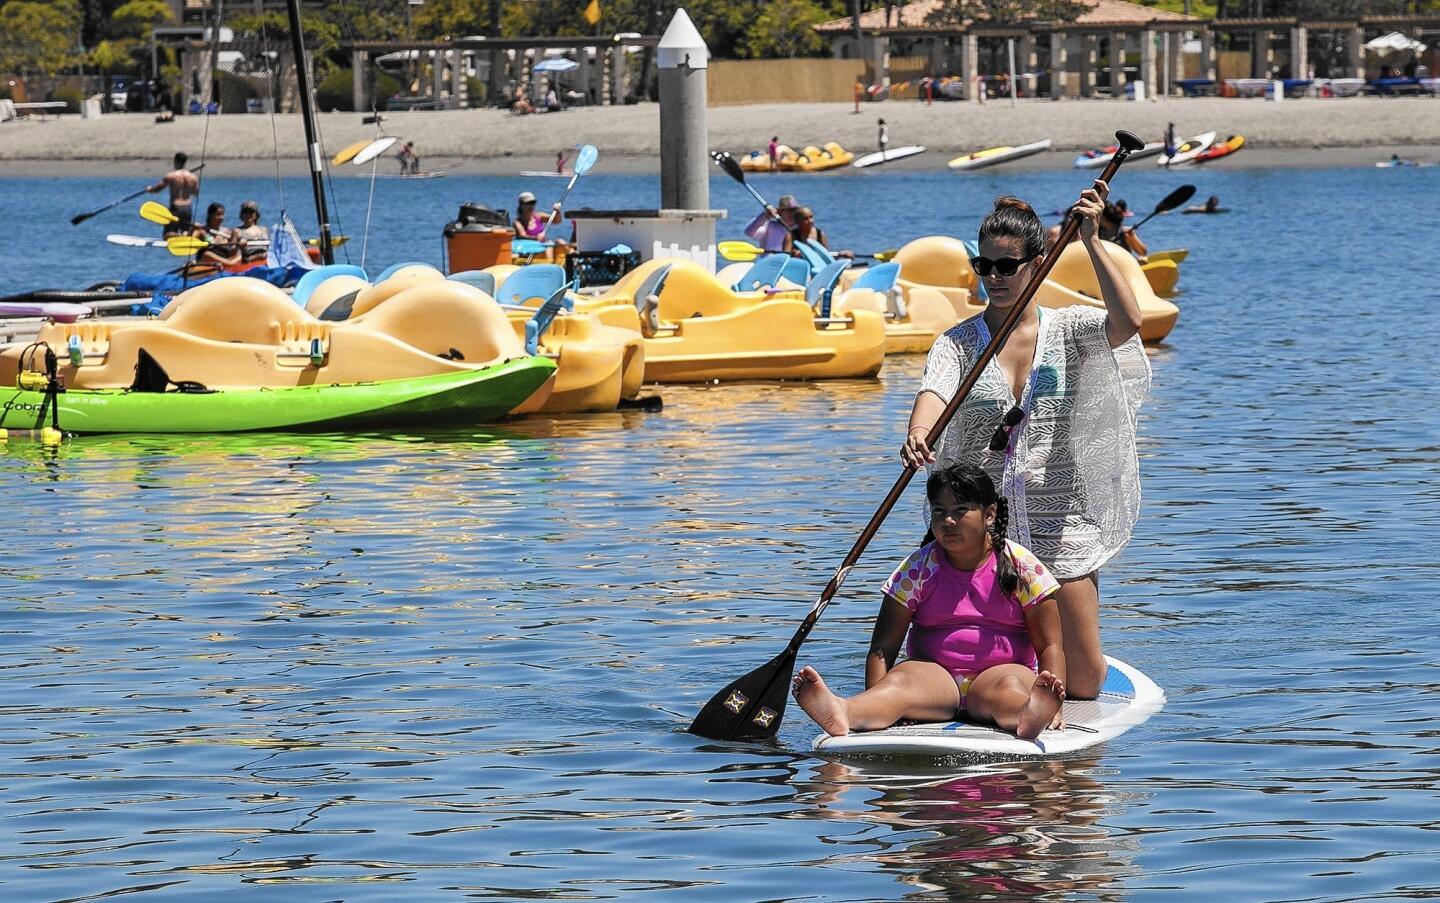 Kathryn Zarkos and Vanessa, 8, ride a paddleboard during the Big F.U.N. Kayak Day for members of Big Brothers Big Sisters of Orange County on Saturday at Newport Dunes in Newport Beach.